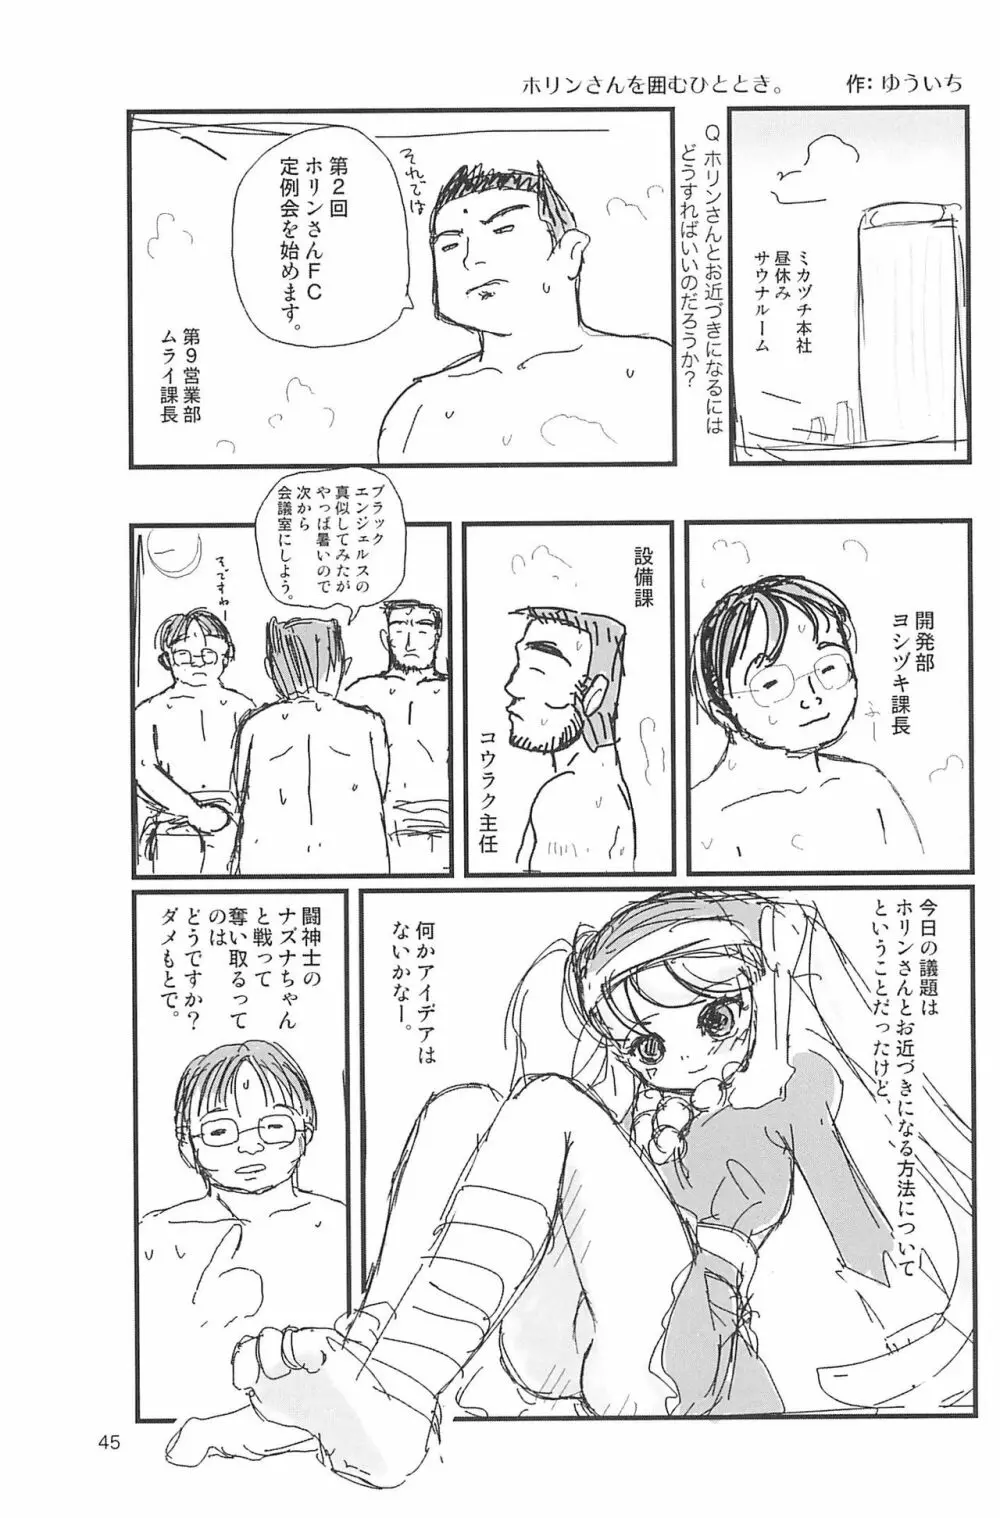 ND-special Volume 5 45ページ